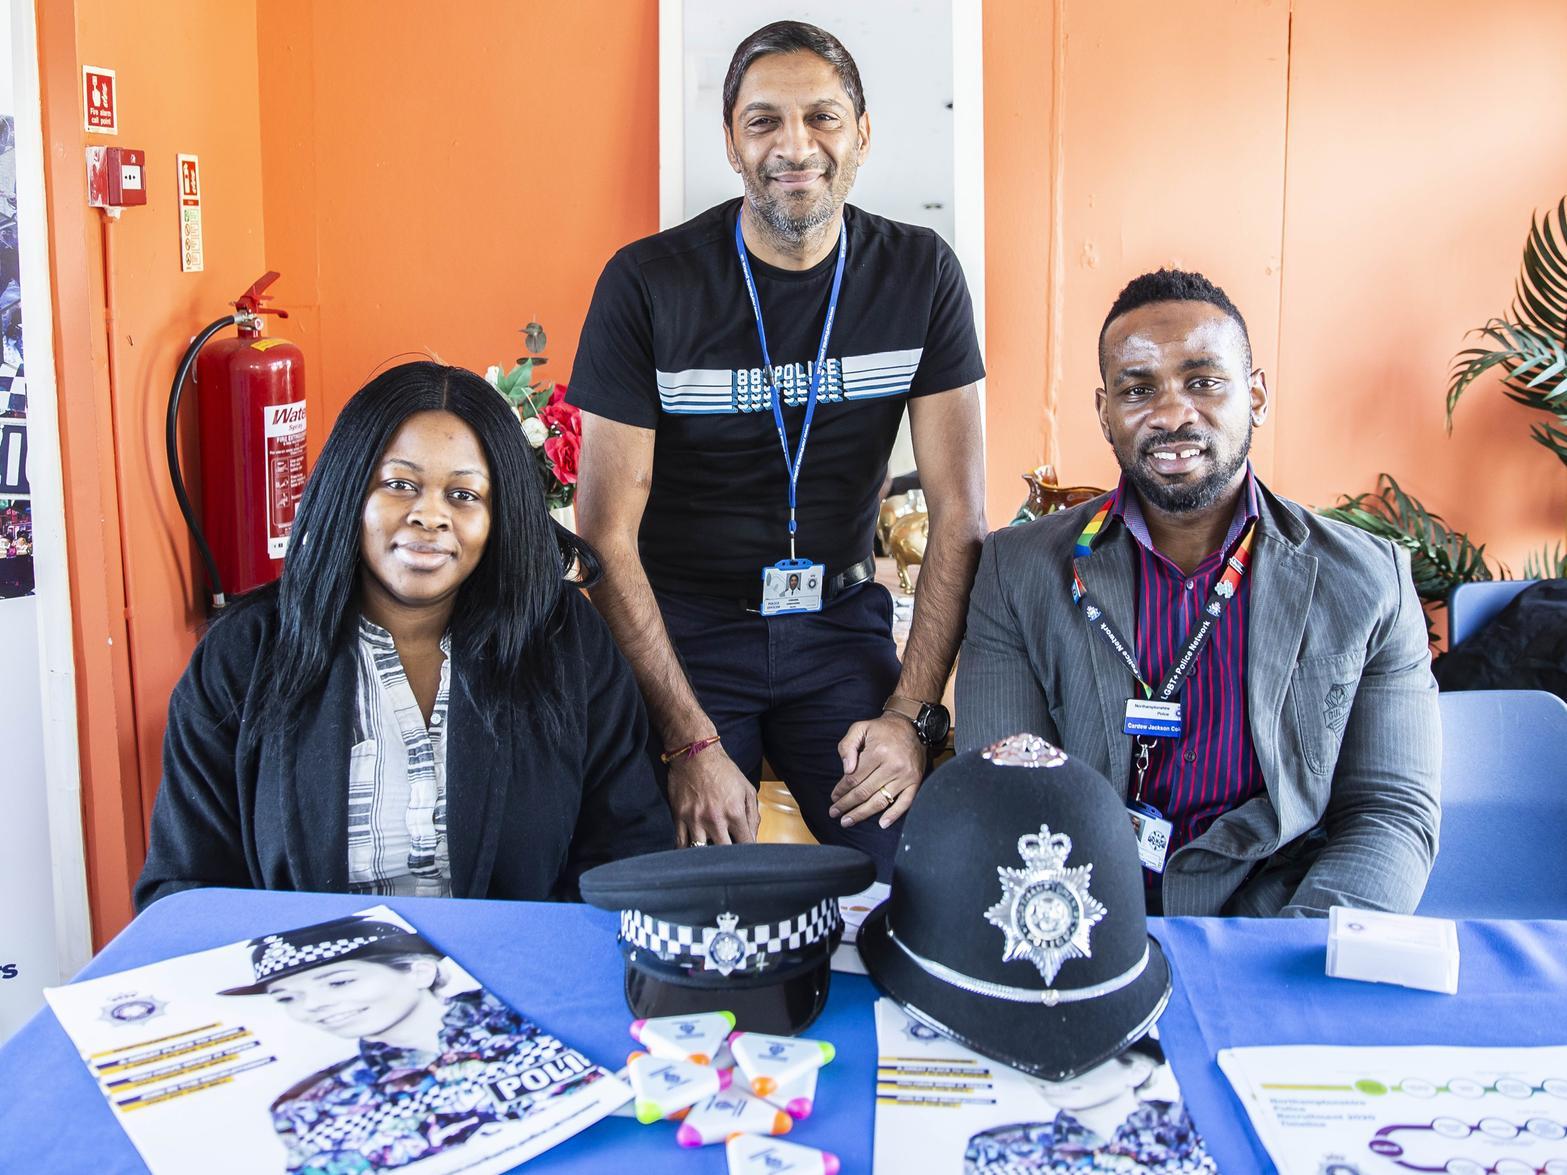 Northamptonshire Police supported the African and Caribbean Festival with a stall